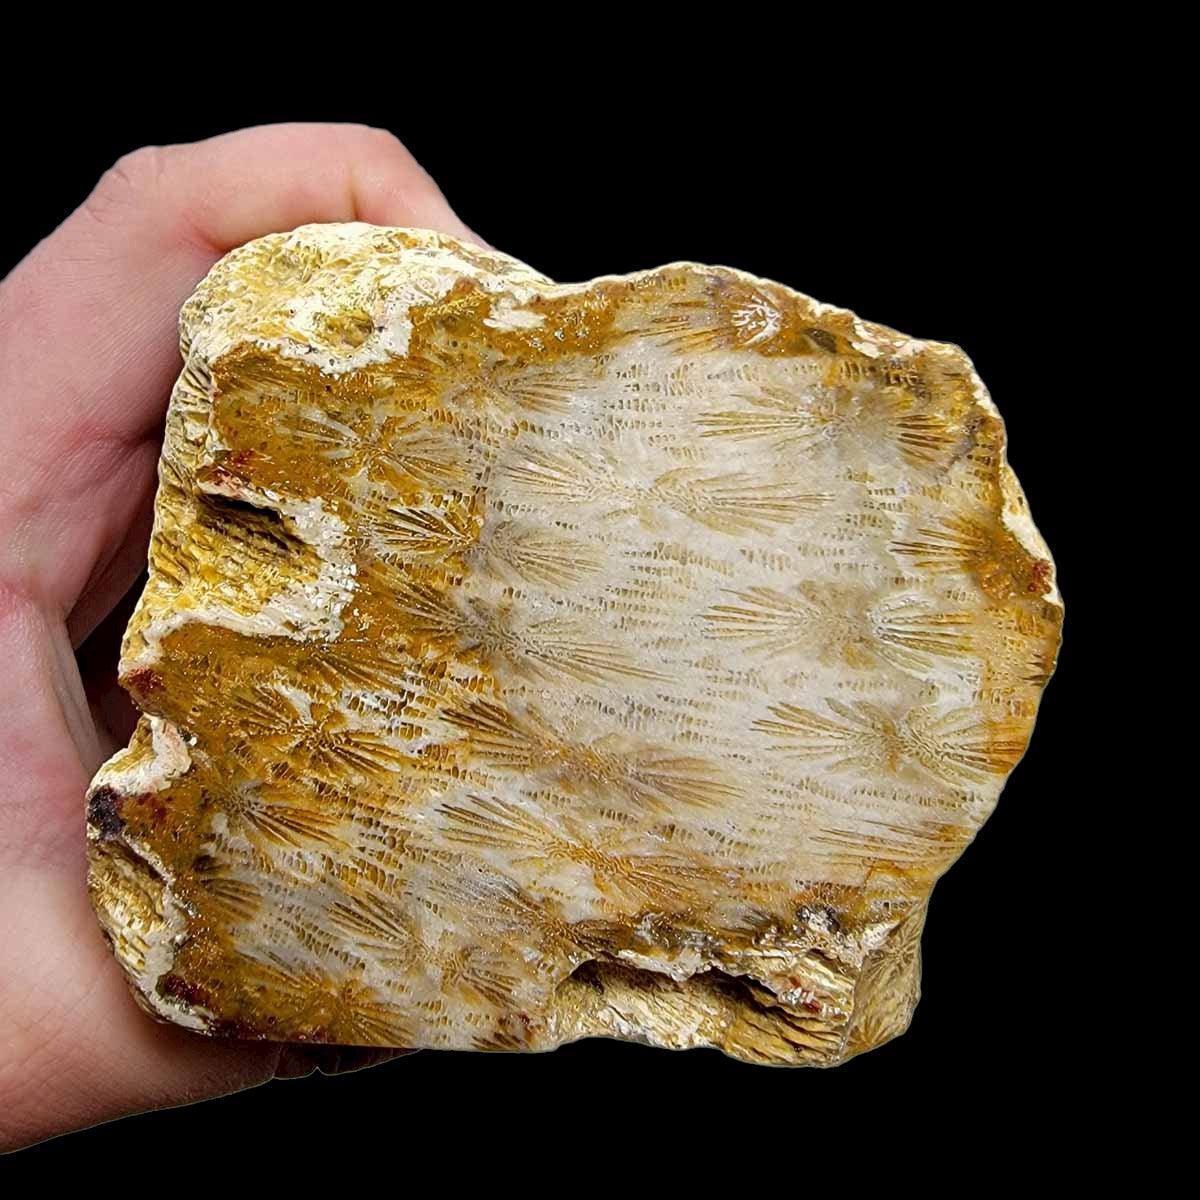 Polished Indonesian Fossil Coral Display Specimen! - LapidaryCentral